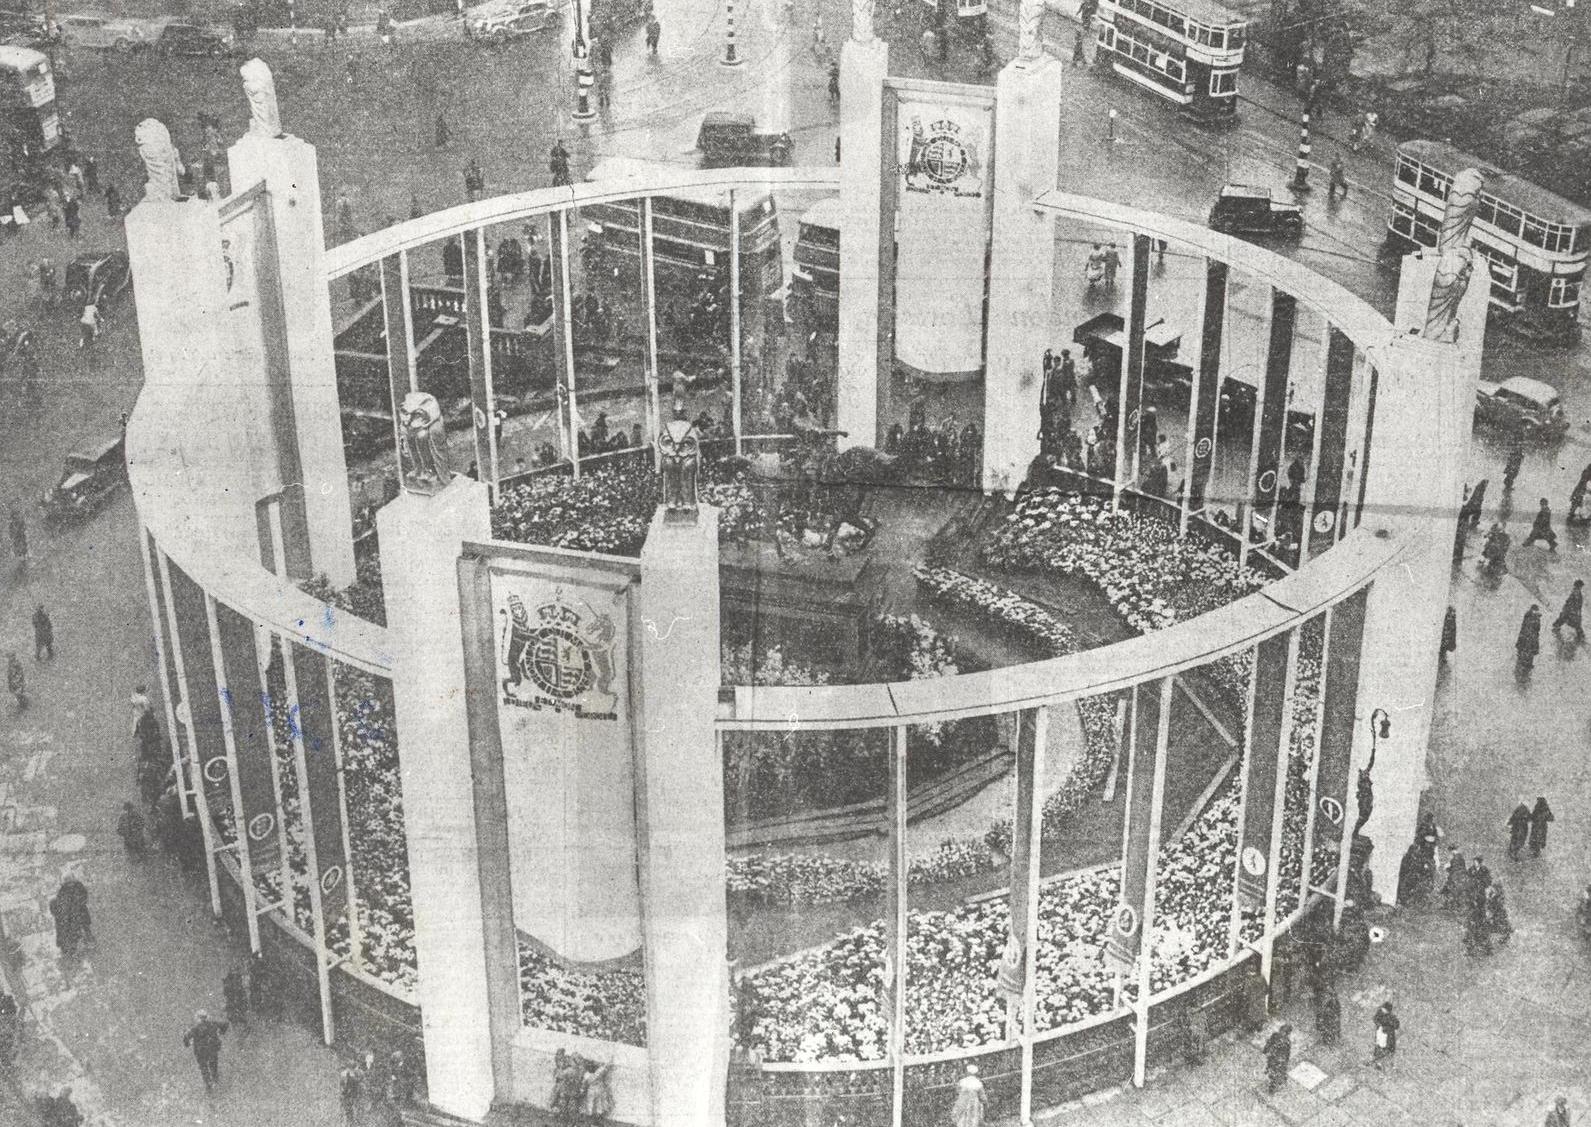 A photo taken from the top of the Queens Hotel showing the elaborate Coronation decoration scheme in City Square. The owls on top of the pylons are the civic emblems and the gardens are laid out with specially grown flowers and plants.